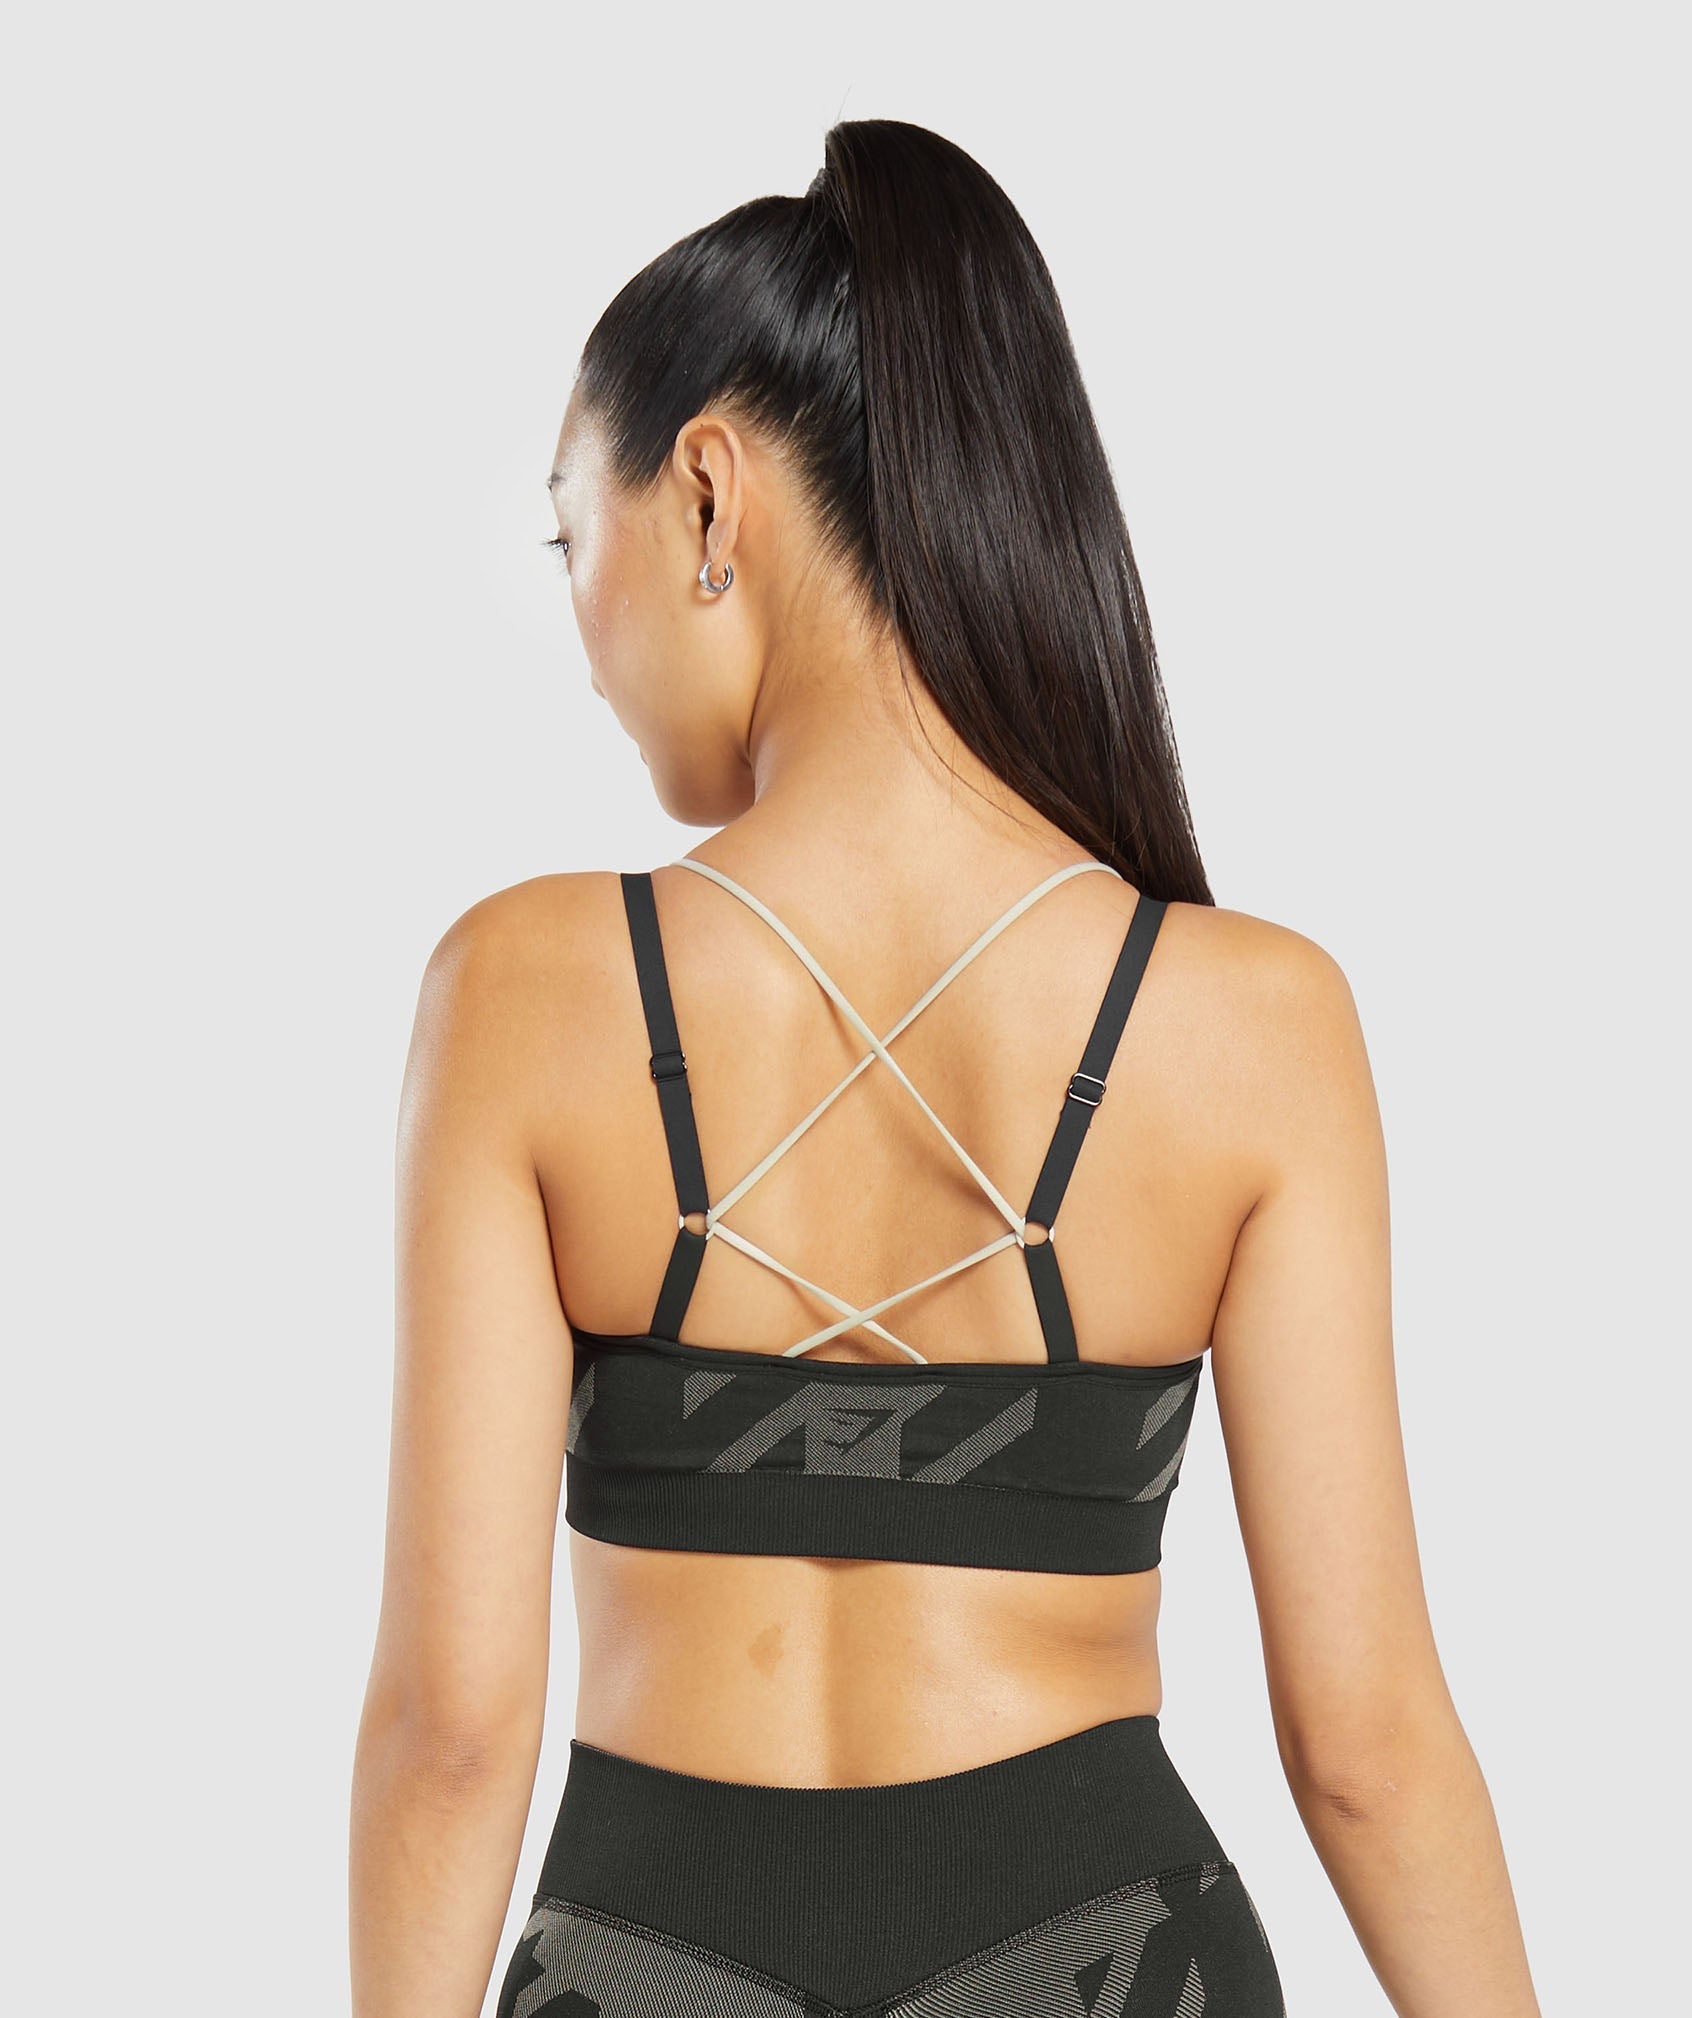 Apex Limit Seamless Ruched Sports Bra in Black/Washed Stone Brown - view 2